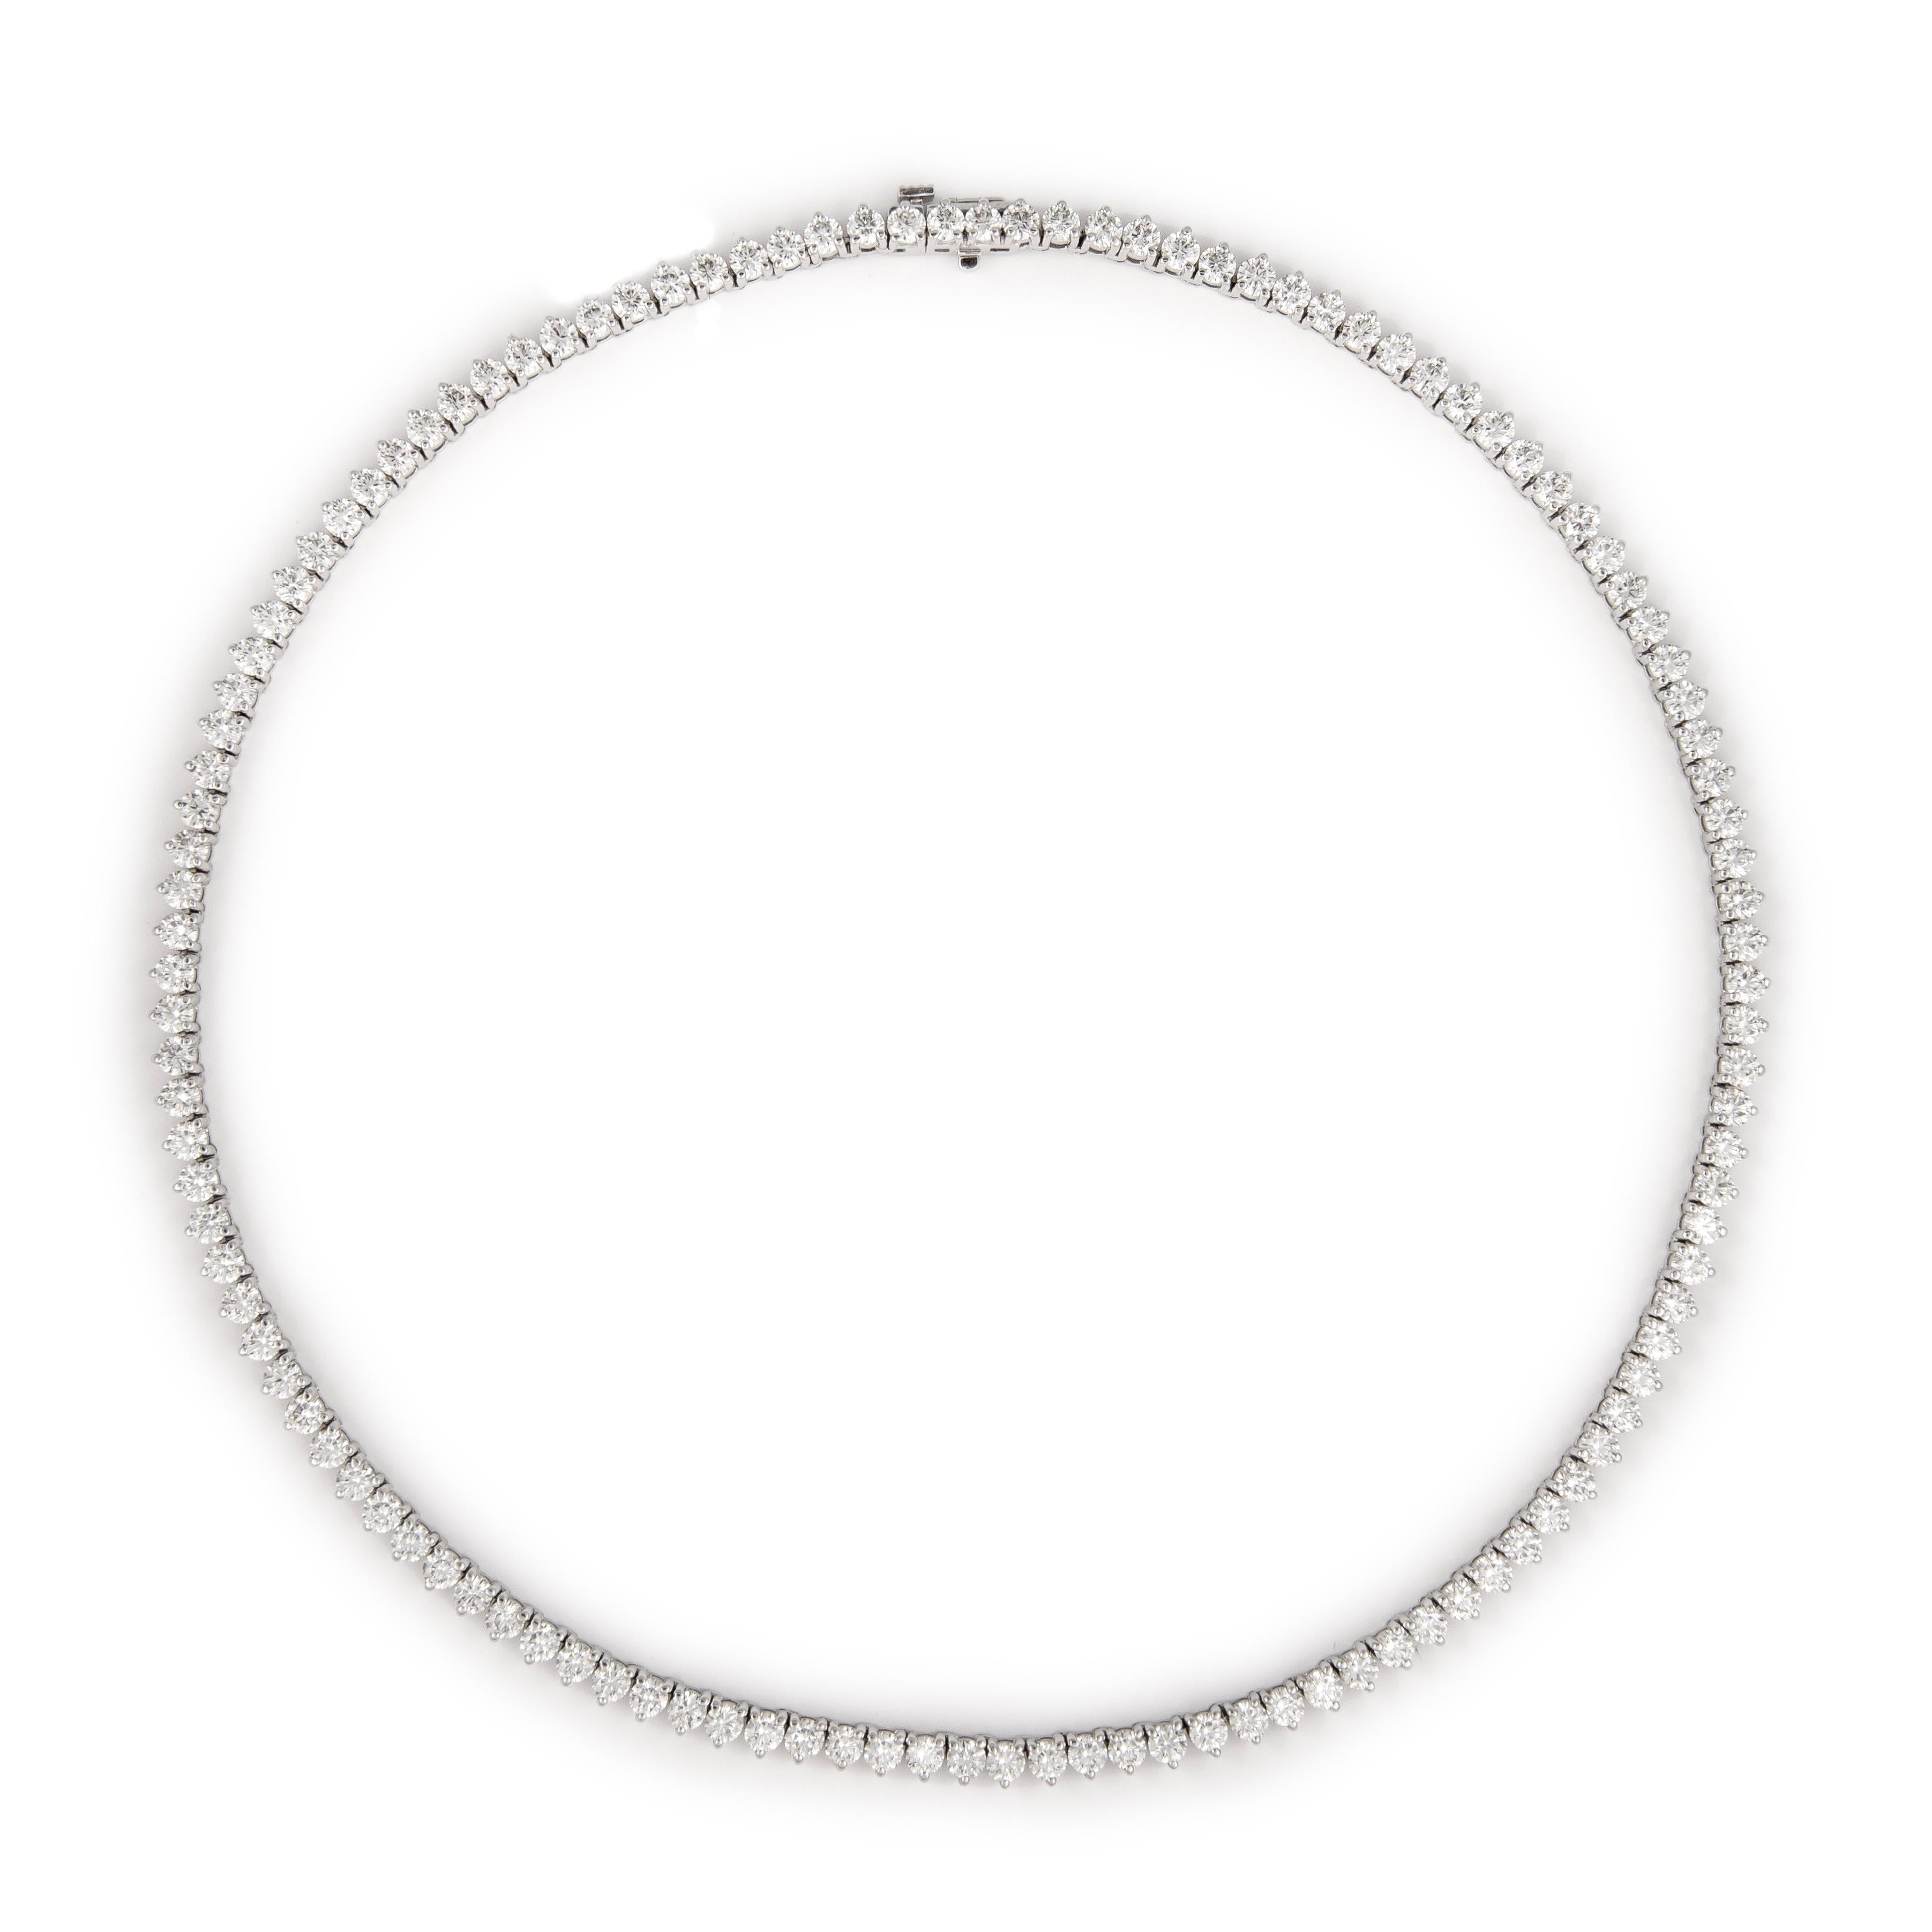 Beautiful and classic diamond tennis necklace, by Alexander Beverly Hills.
119 round brilliant diamonds, 16.26 carats. Approximately H/I color and SI clarity. 18k white gold, 30.76 grams, prong set, 16in.
Accommodated with an up-to-date appraisal by